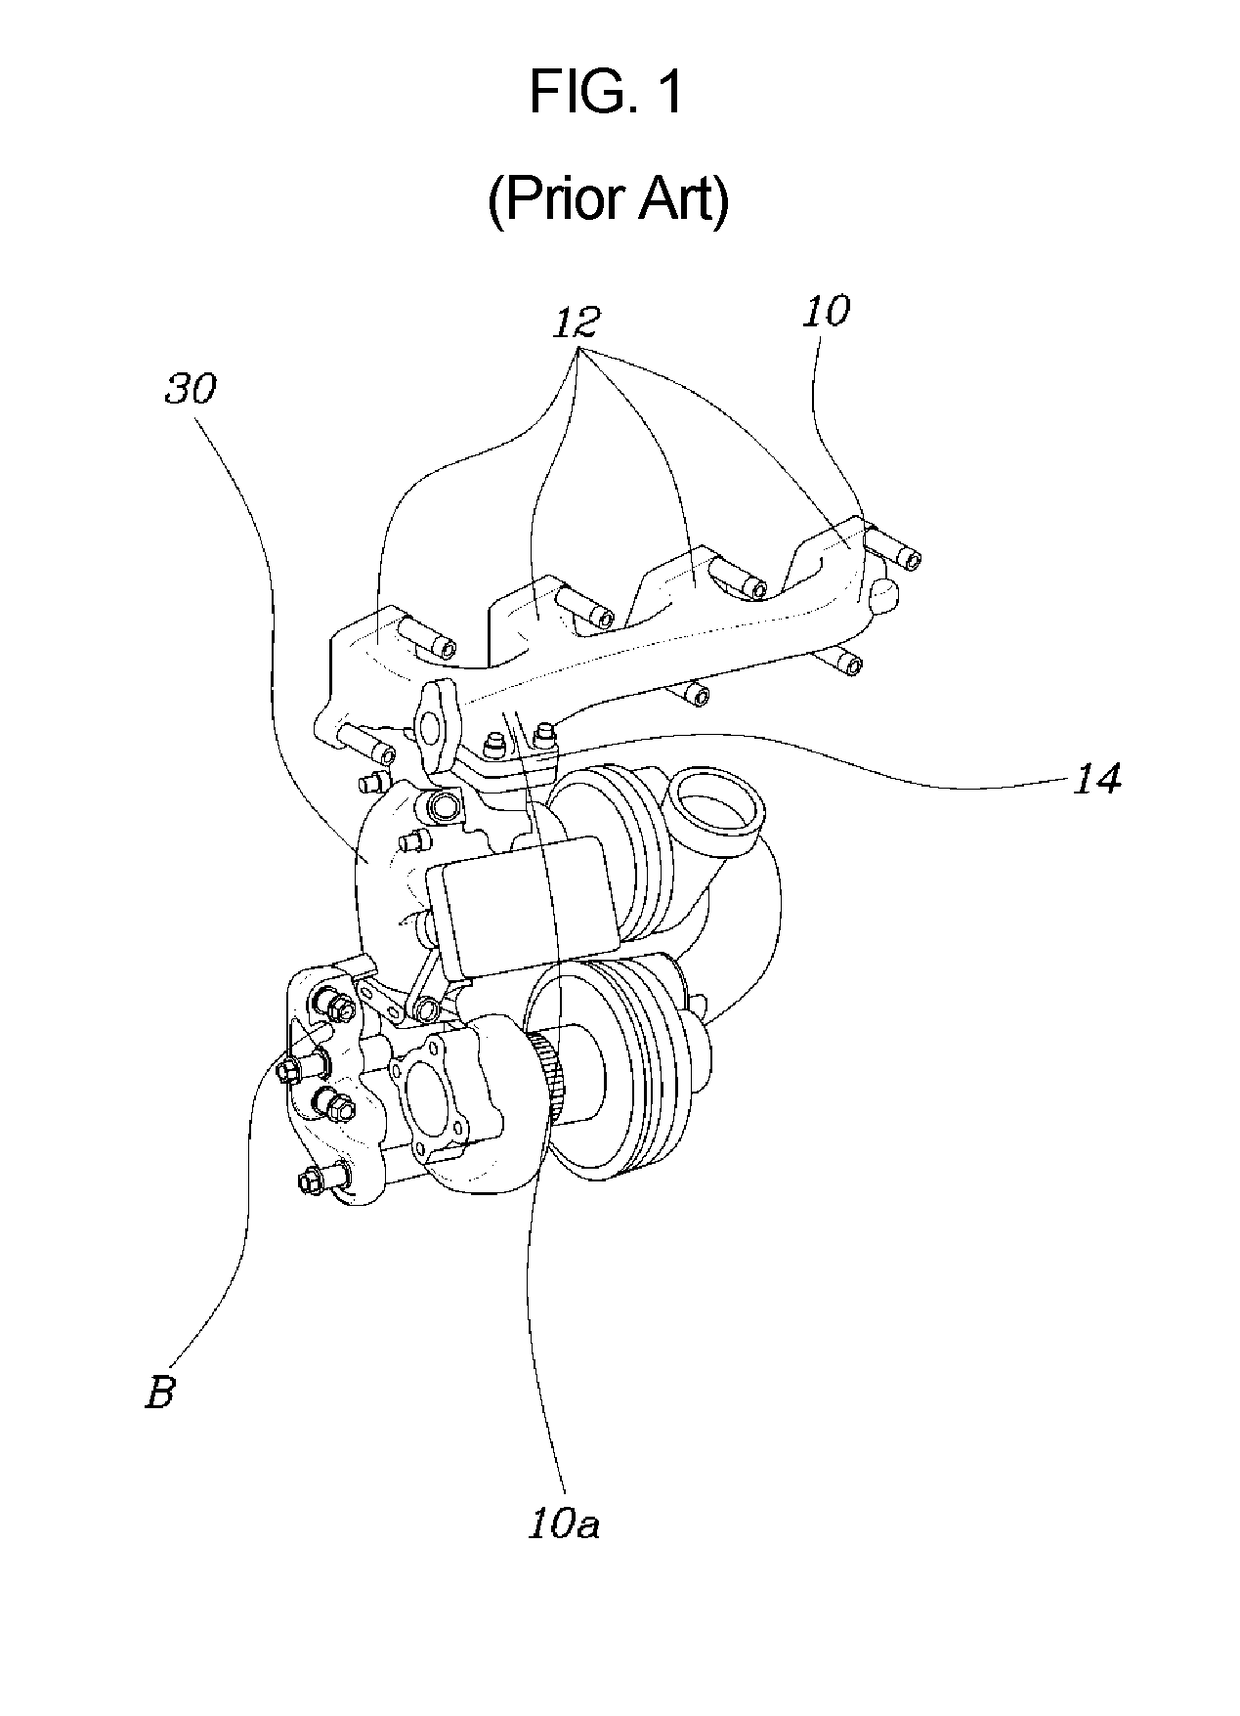 Apparatus for compensating for thermal expansion occurring from exhaust manifold